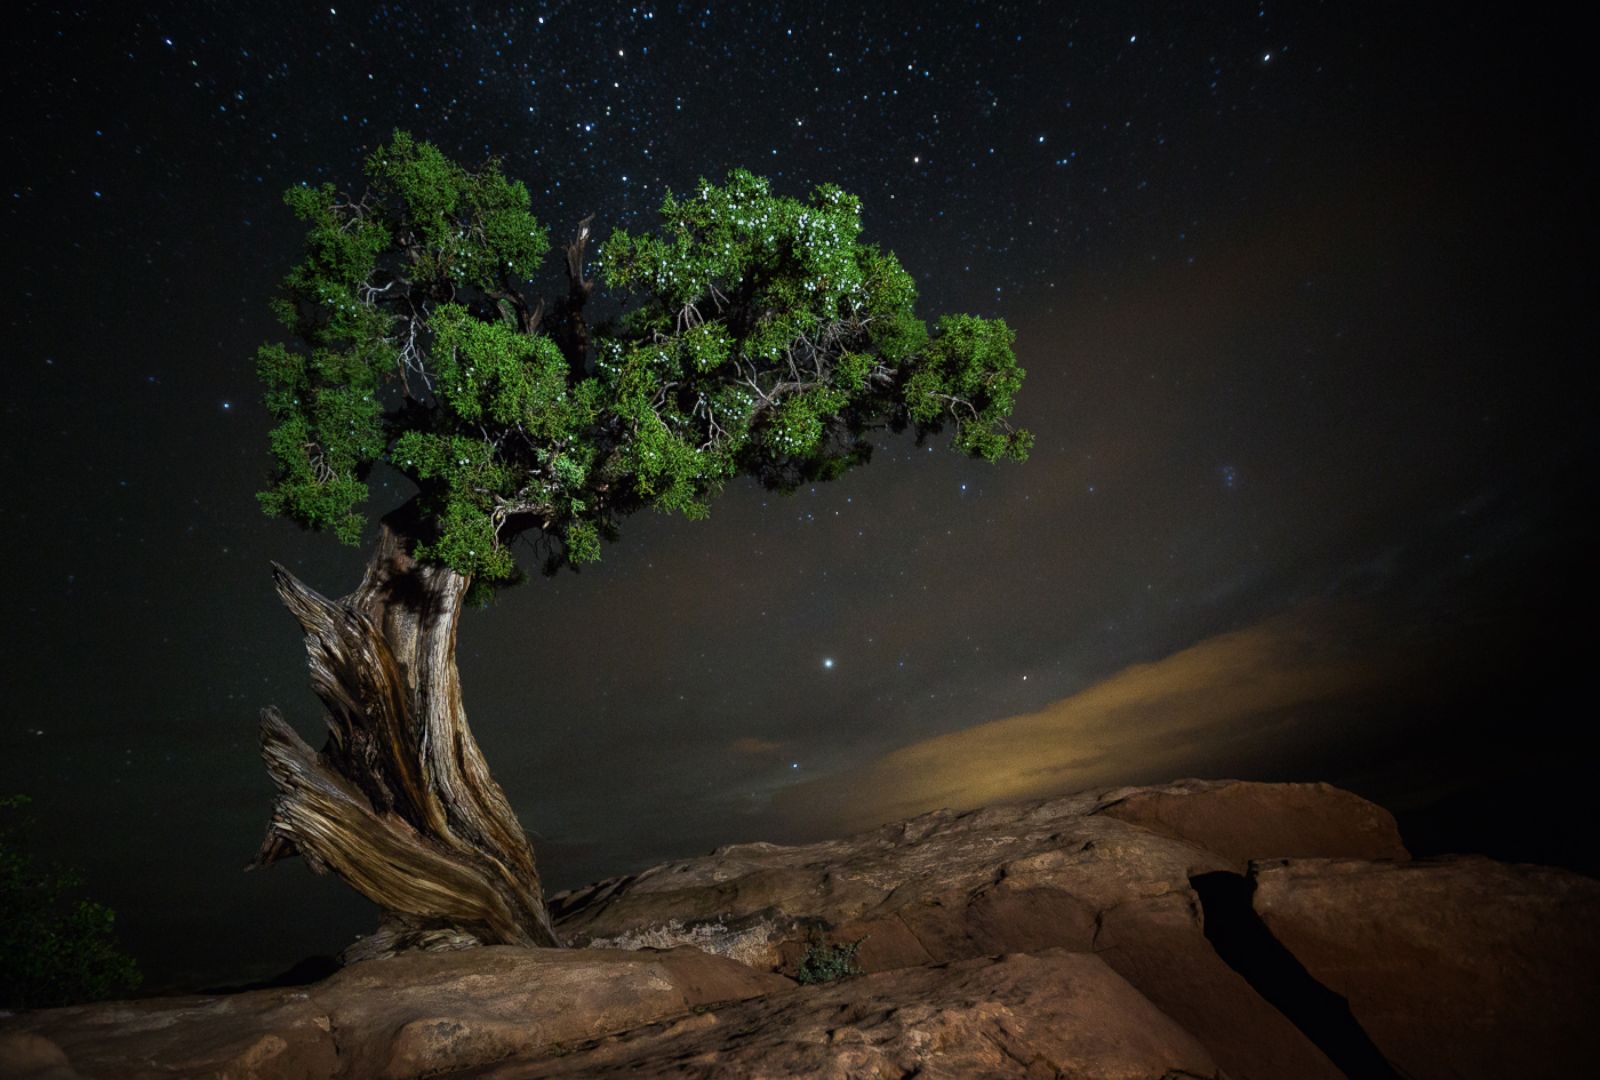 Ancient Skies, Ancient Trees: The Relationship Between Trees and Stars